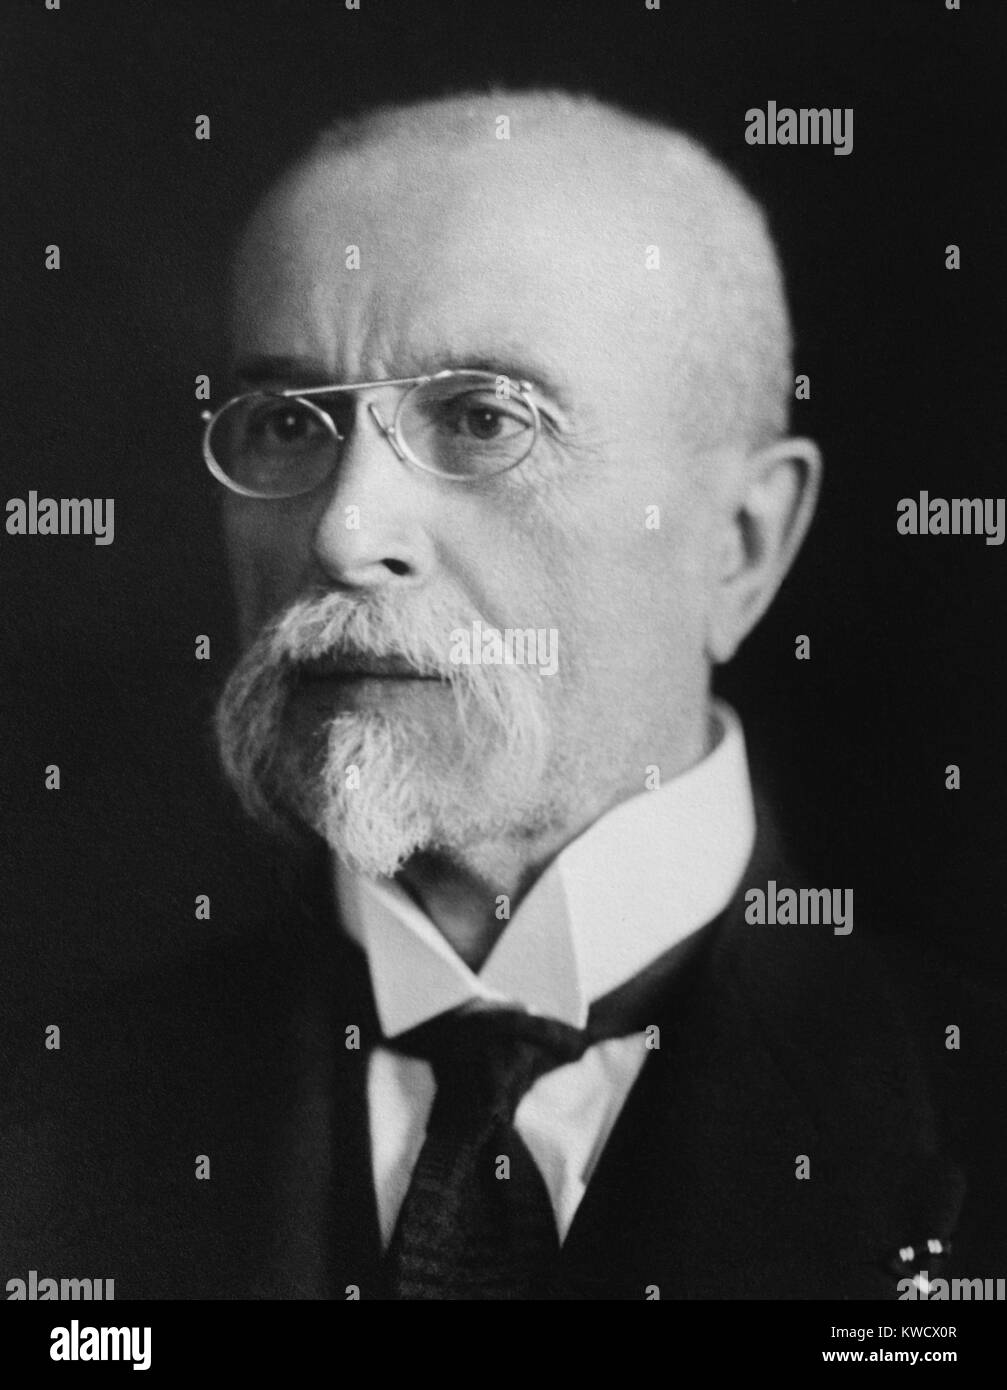 Thomas G. Masaryk, founder and first President of Czechoslovakia, from 1918 to 1935 (BSLOC 2017 1 80) Stock Photo